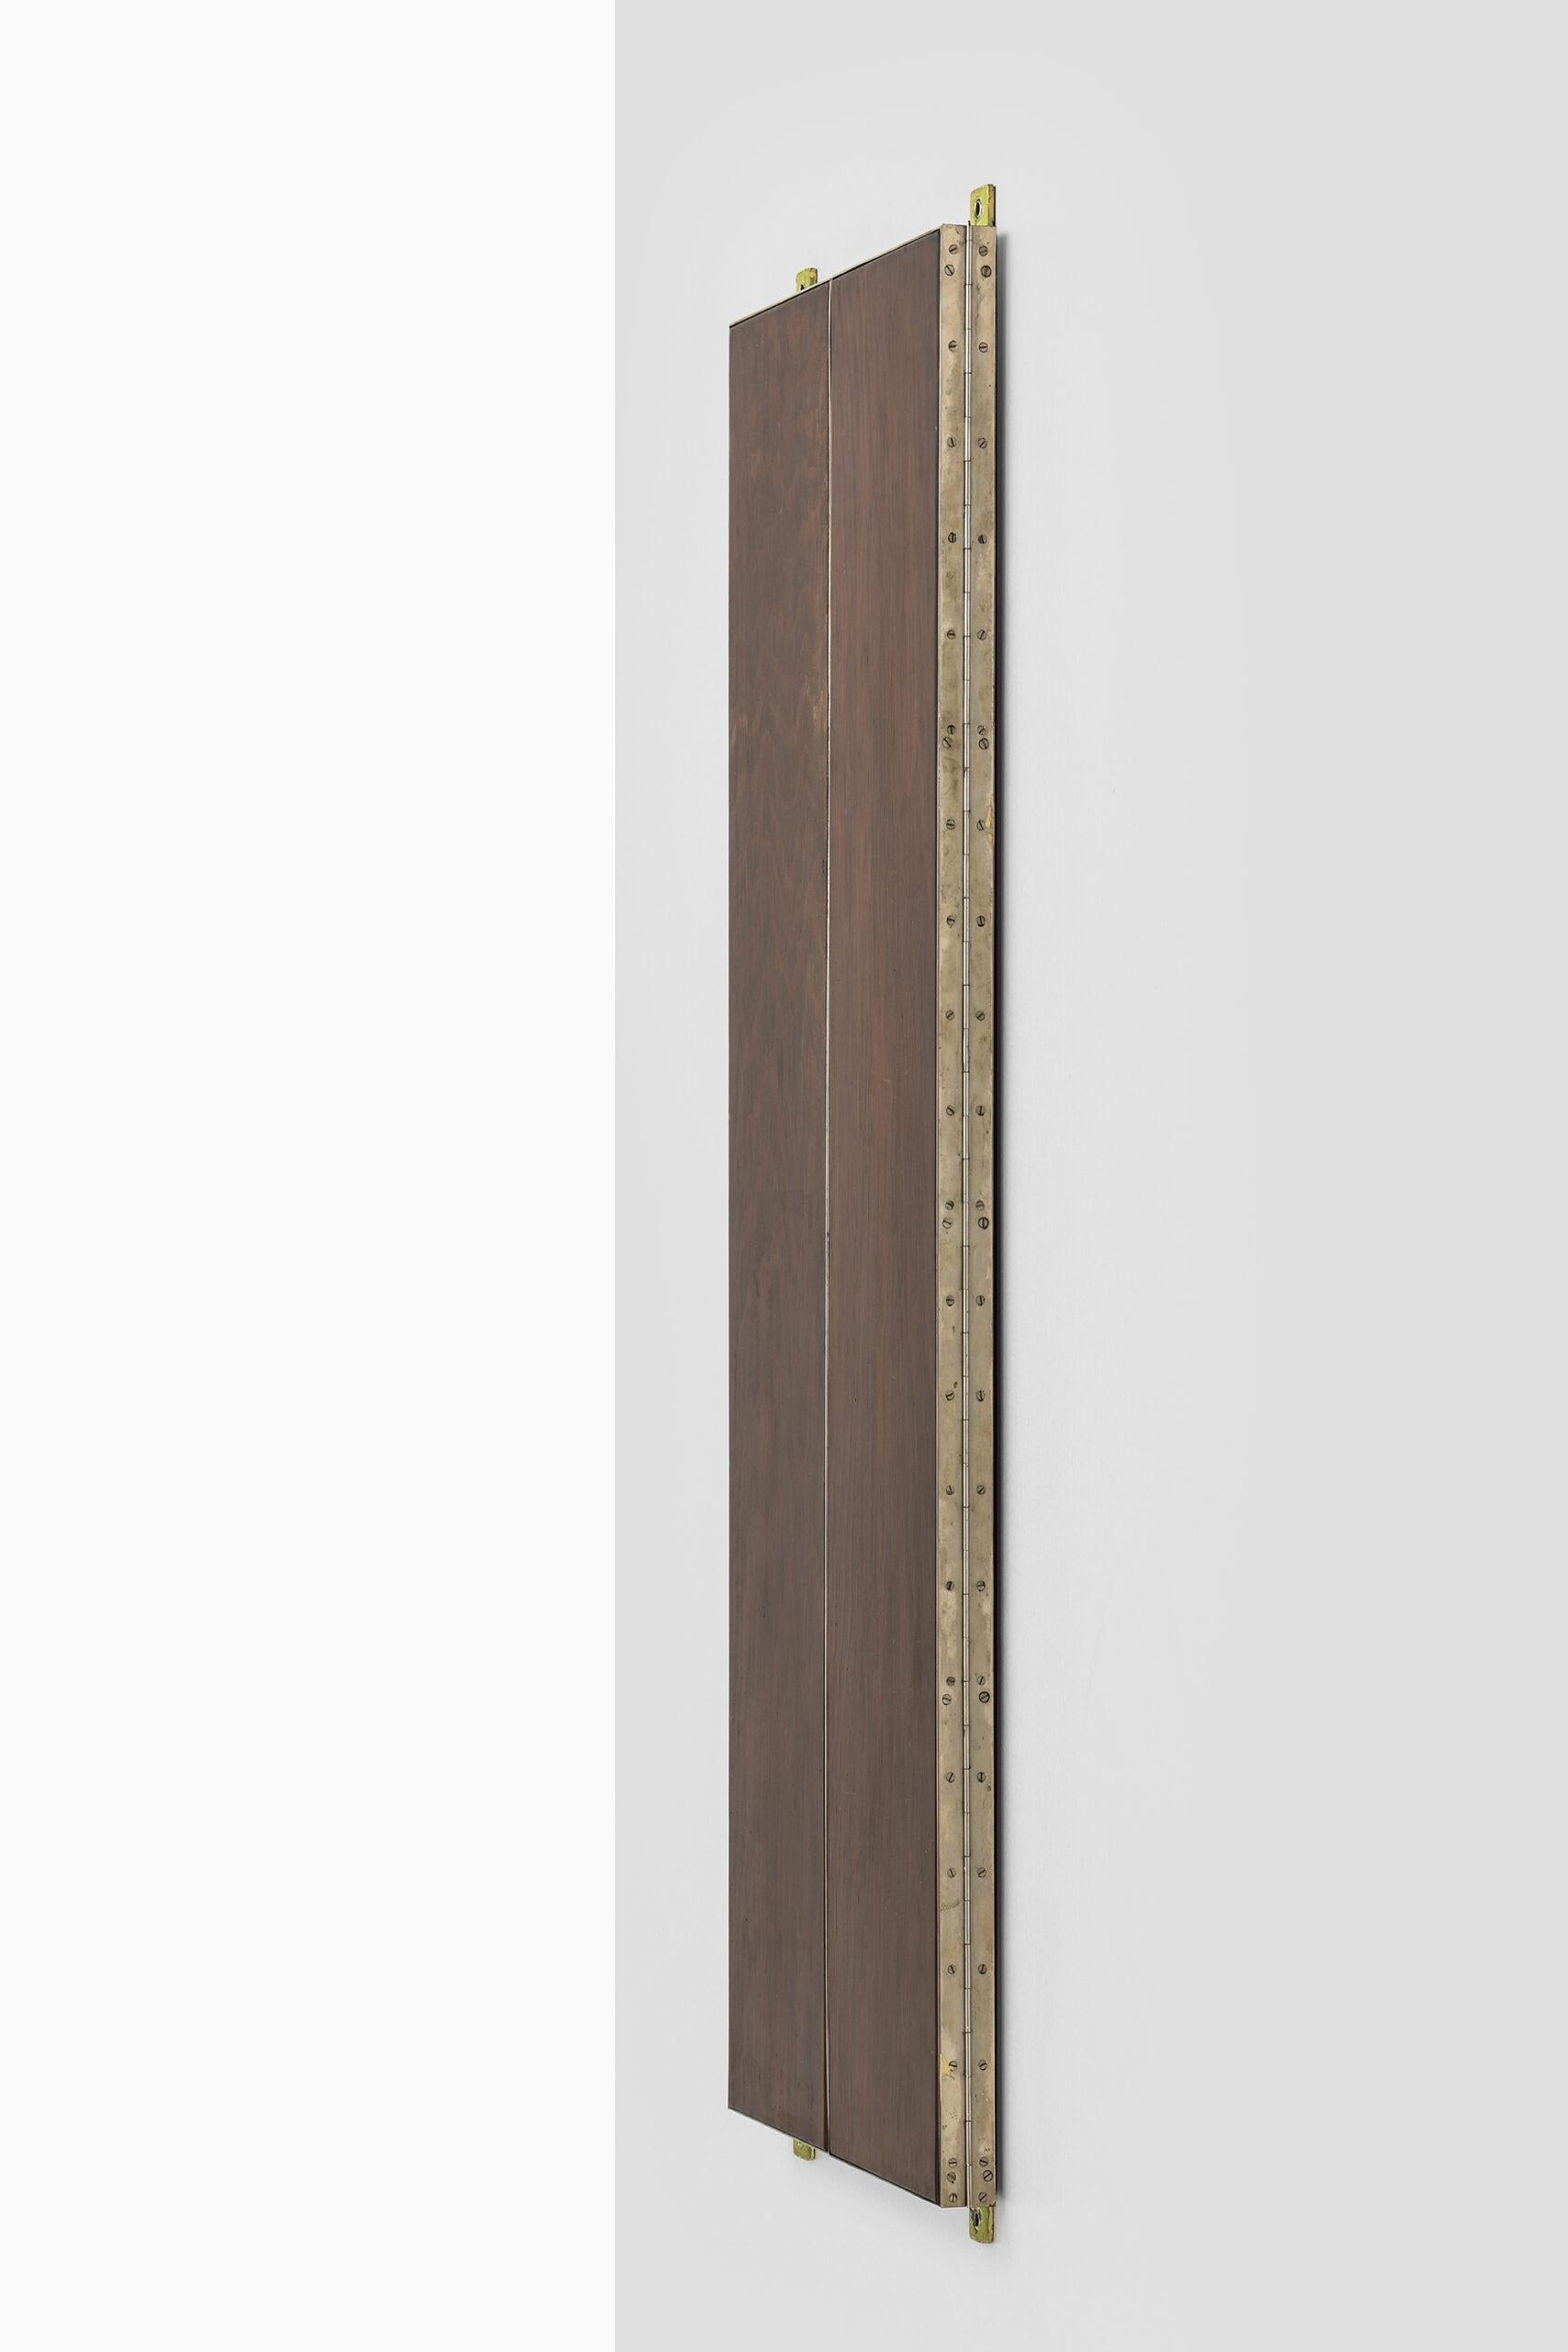 Large mirror by unknown designer. Produced in Sweden.
Measure: Width: 51 ( 101 ) cm.